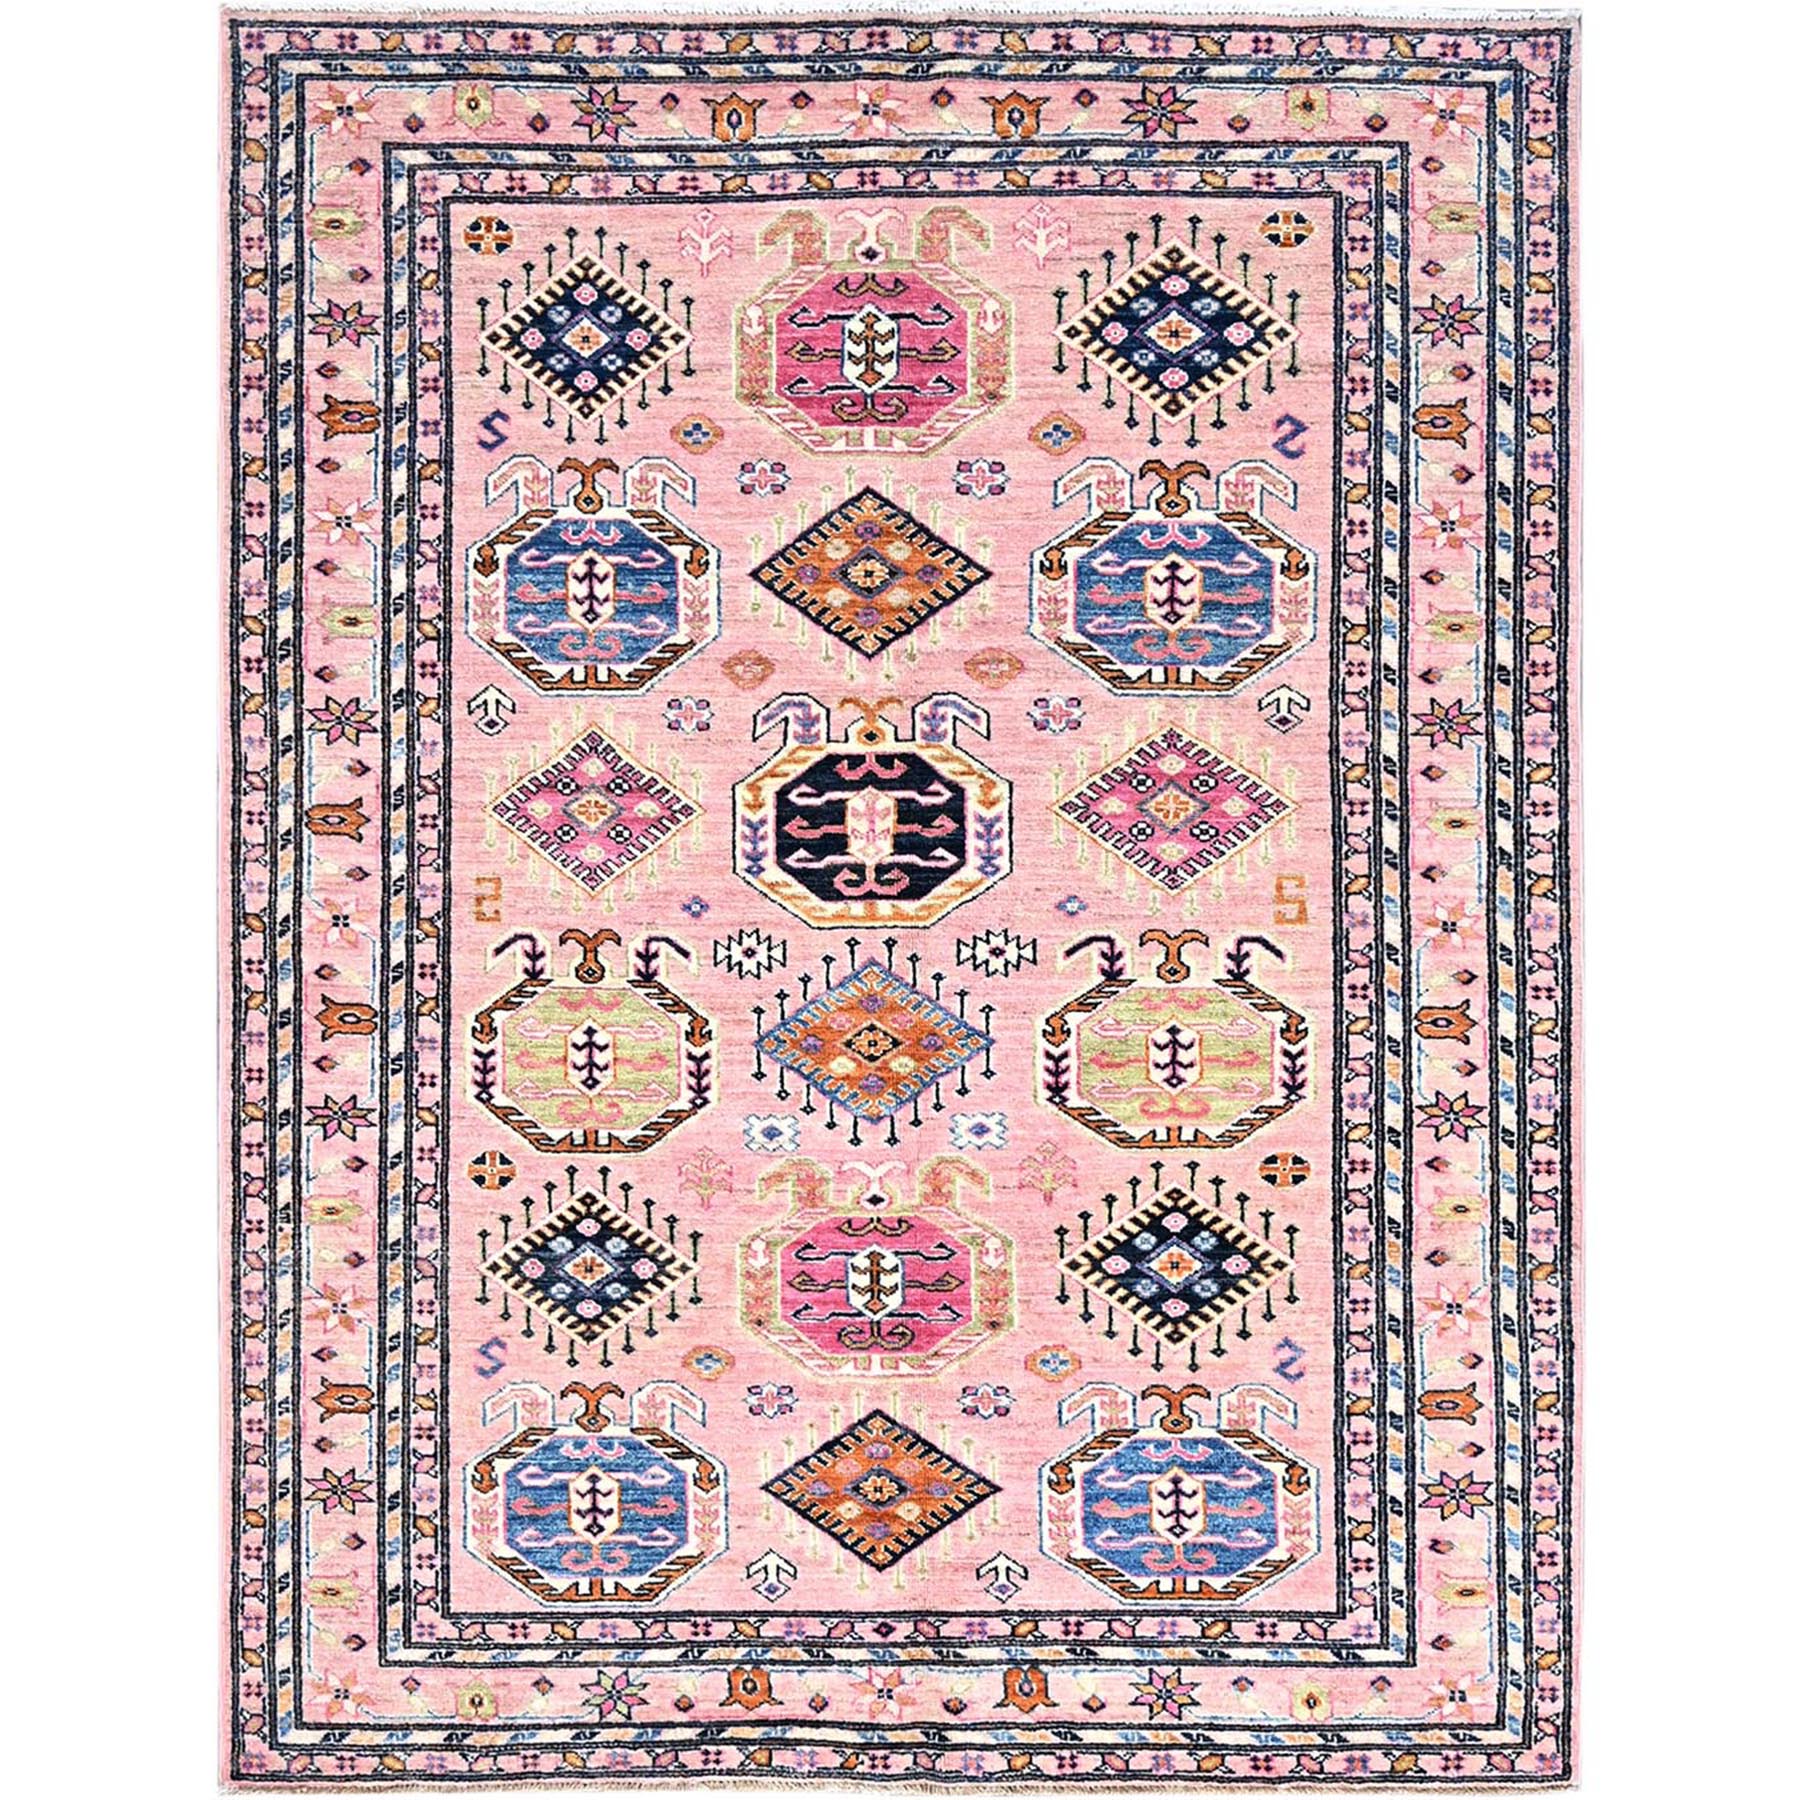 Flamingo Pink and Navajo White, Denser Weave, 100% Wool, Hand Knotted, Afghan Super Kazak With Geometric Medallions, Natural Dyes, Oriental Rug